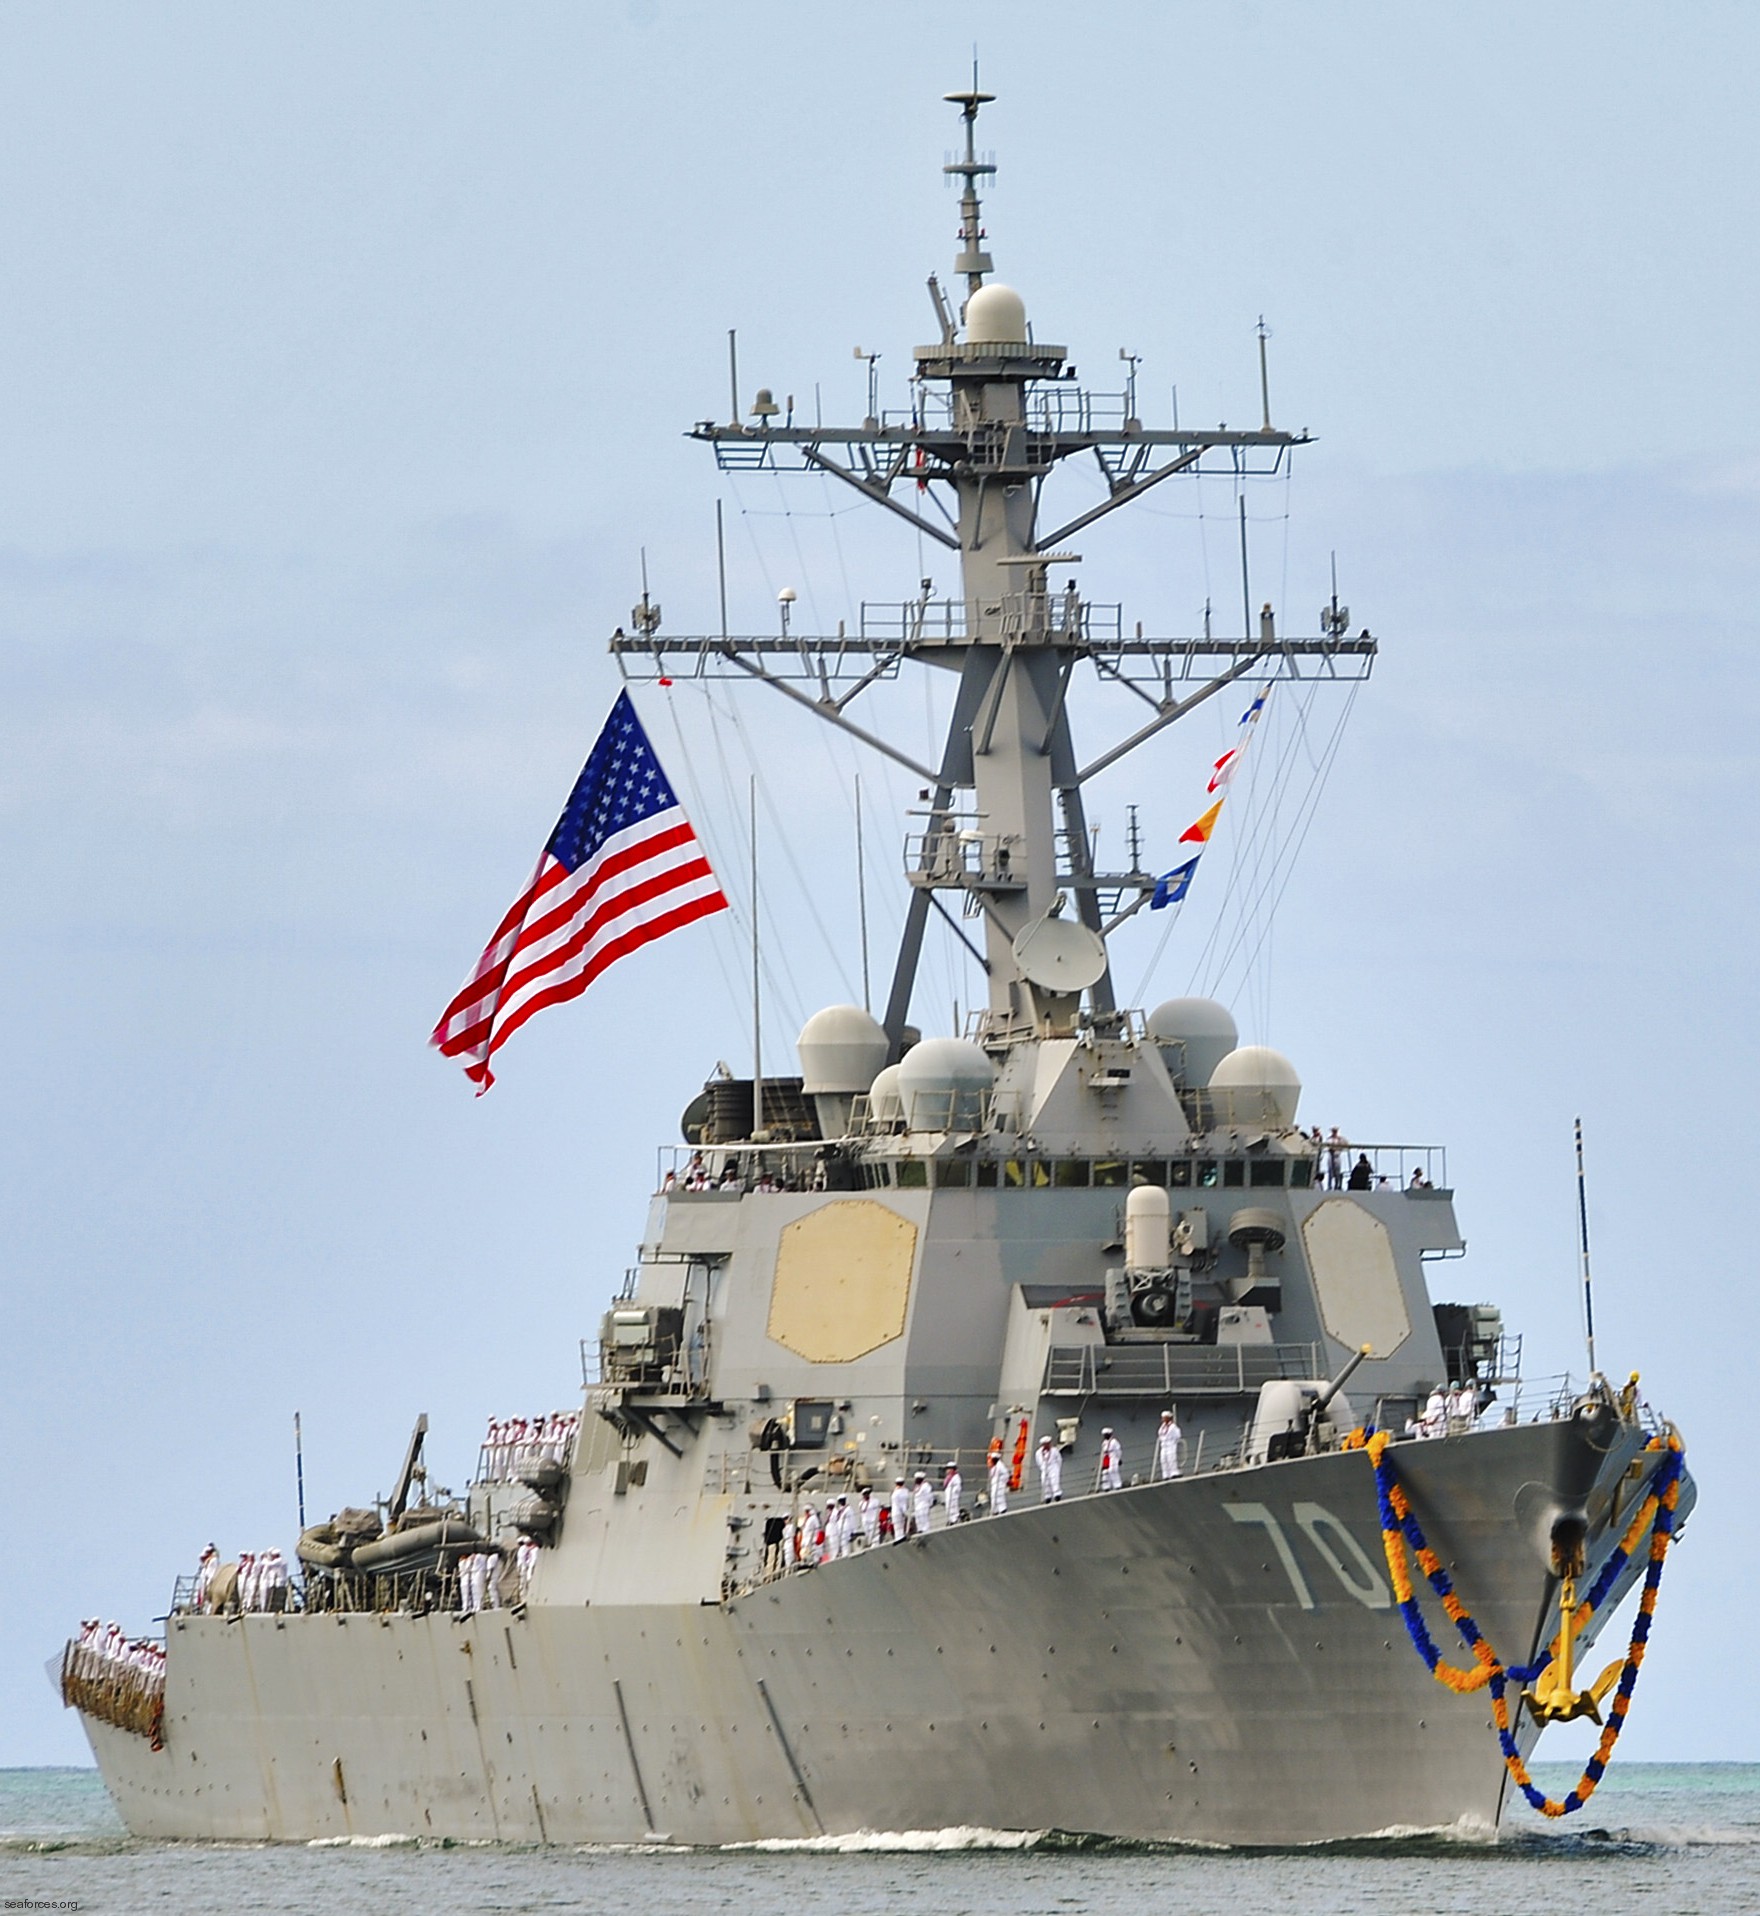 ddg-70 uss hopper guided missile destroyer arleigh burke class aegis bmd 16 joint base pearl harbor hickam hawaii